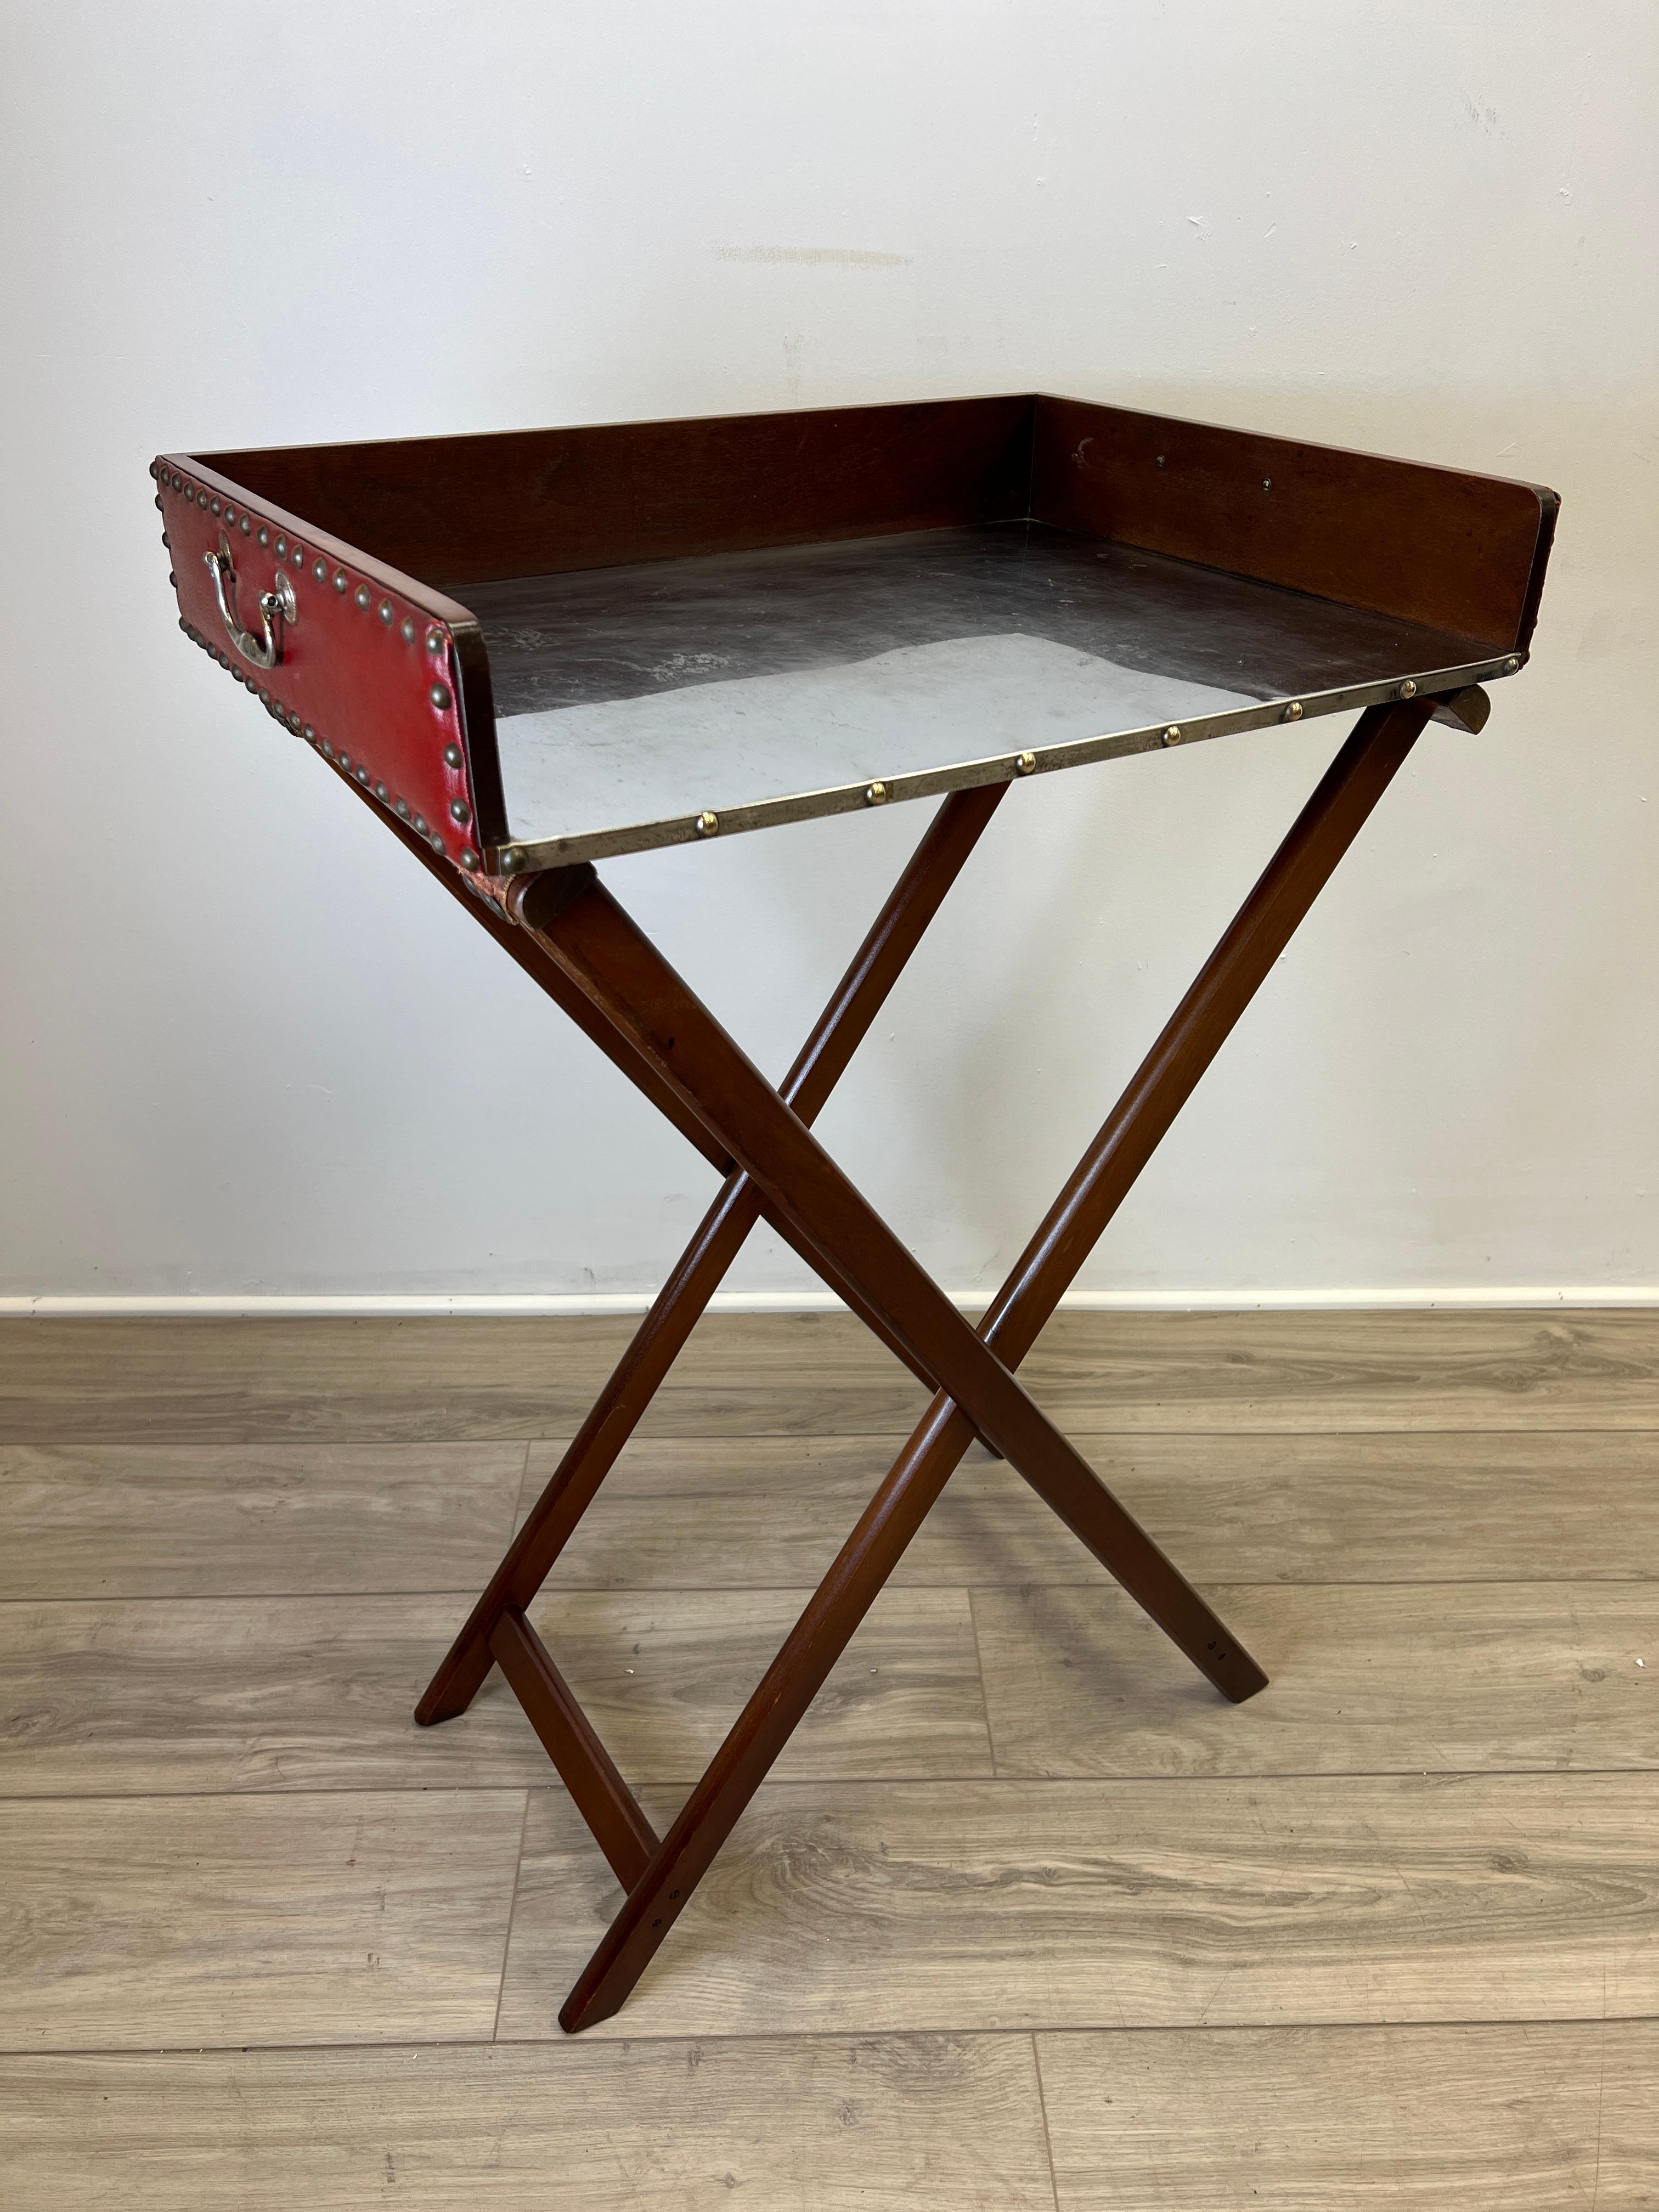 Featured is a wonderful small English vintage bar tray table on a collapsable stand. The stand is made of hinged mahogany legs mounted with a pair of leather straps. The top tray is built of mahogany as well, lined on three sides with red embossed